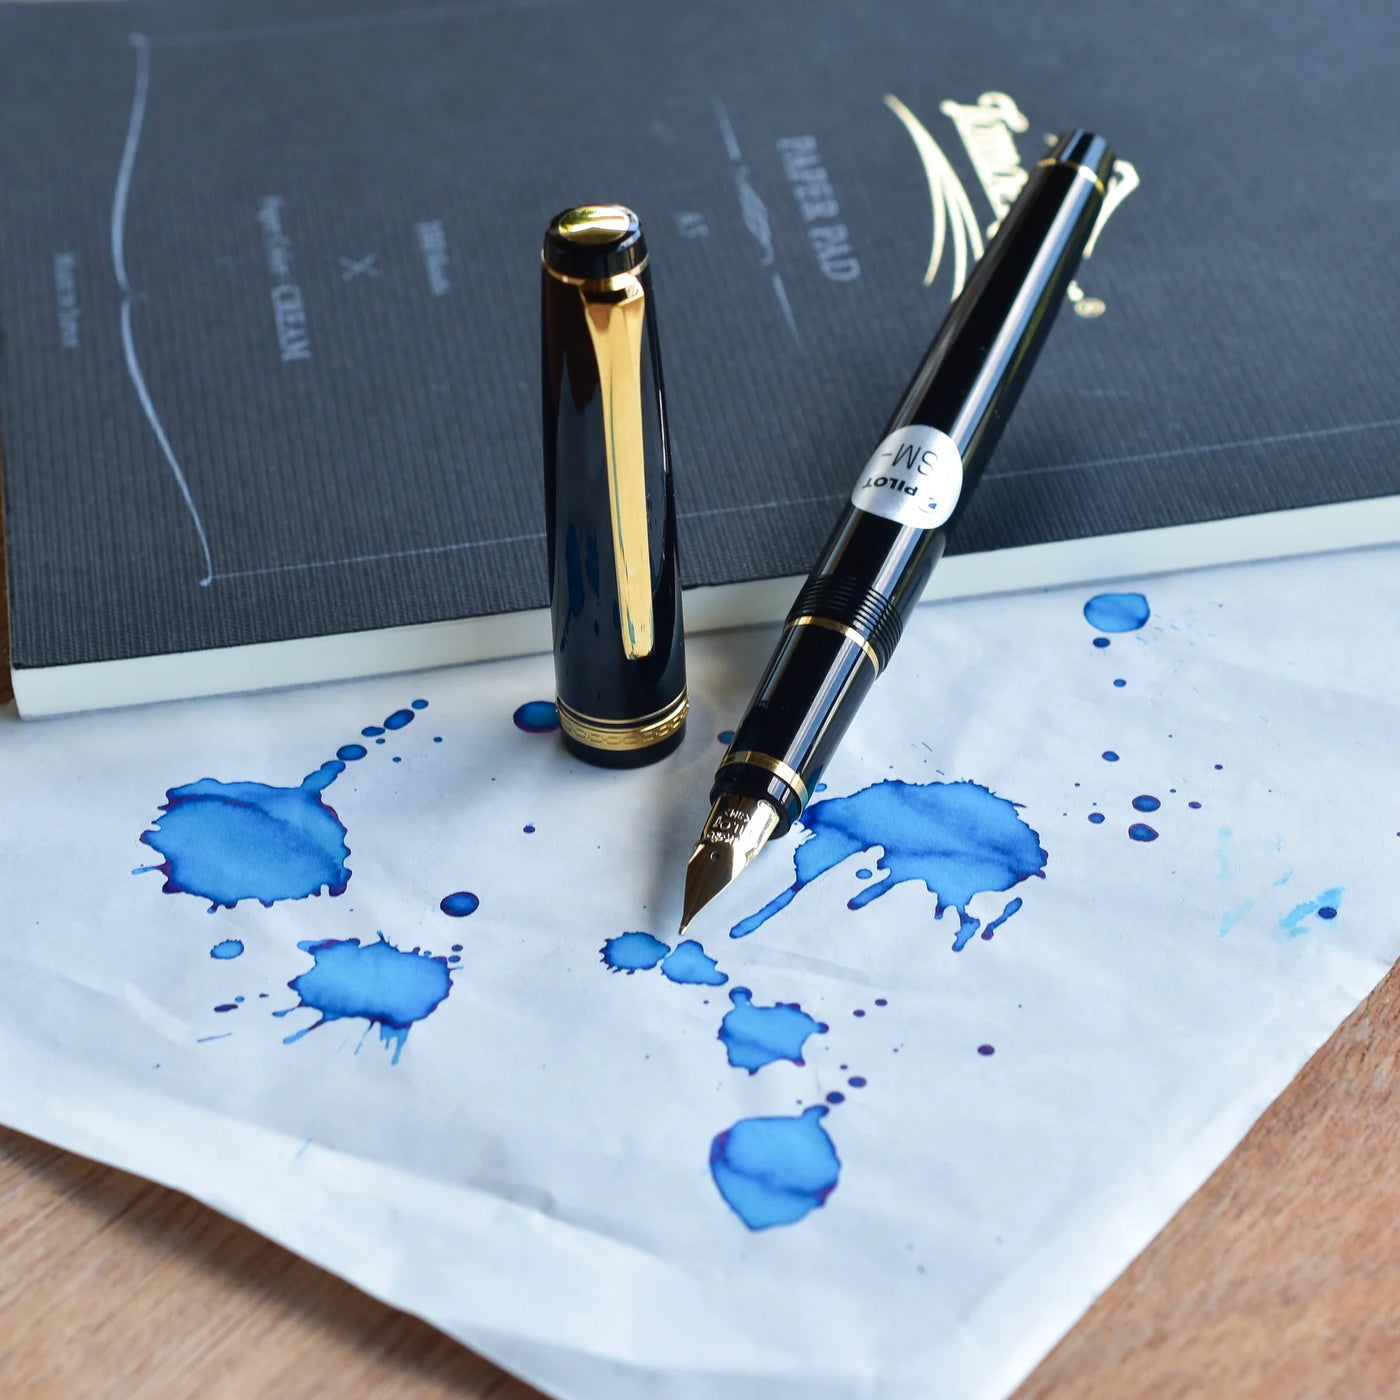 Louis Vuitton designer stationery will soon fancy your writing